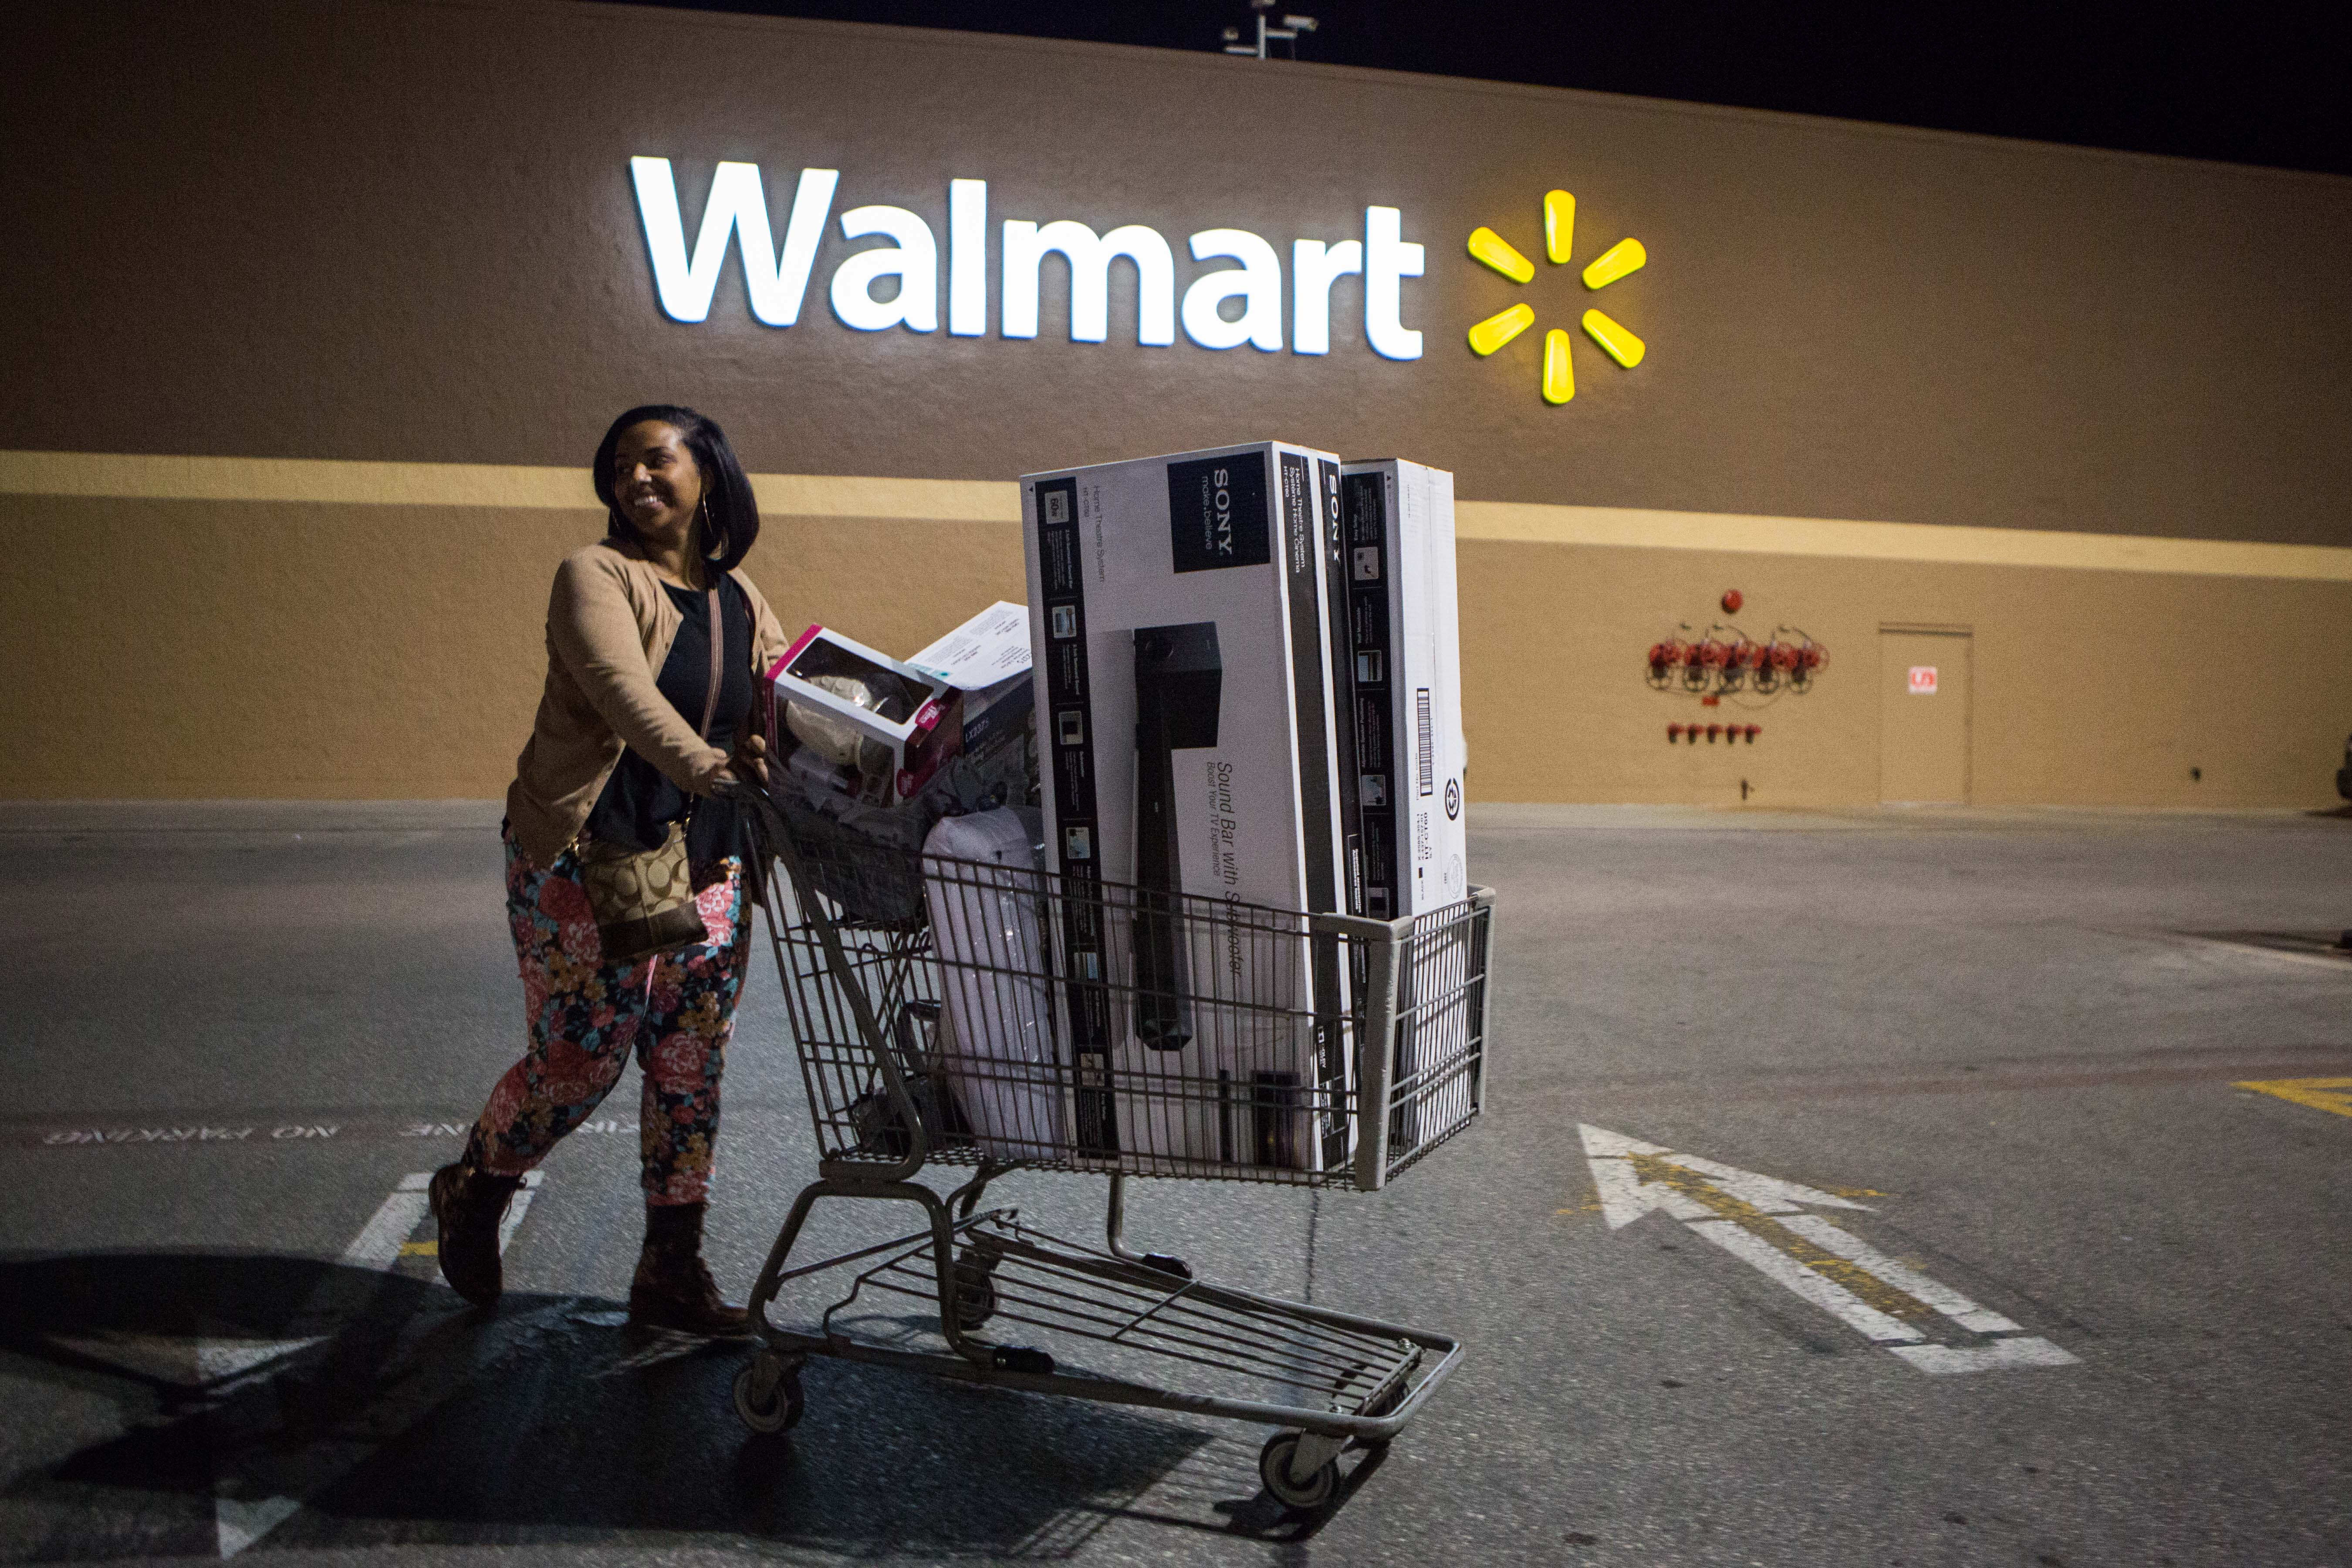 Get ready for big deals in the Walmart Black Friday 2014 ad.